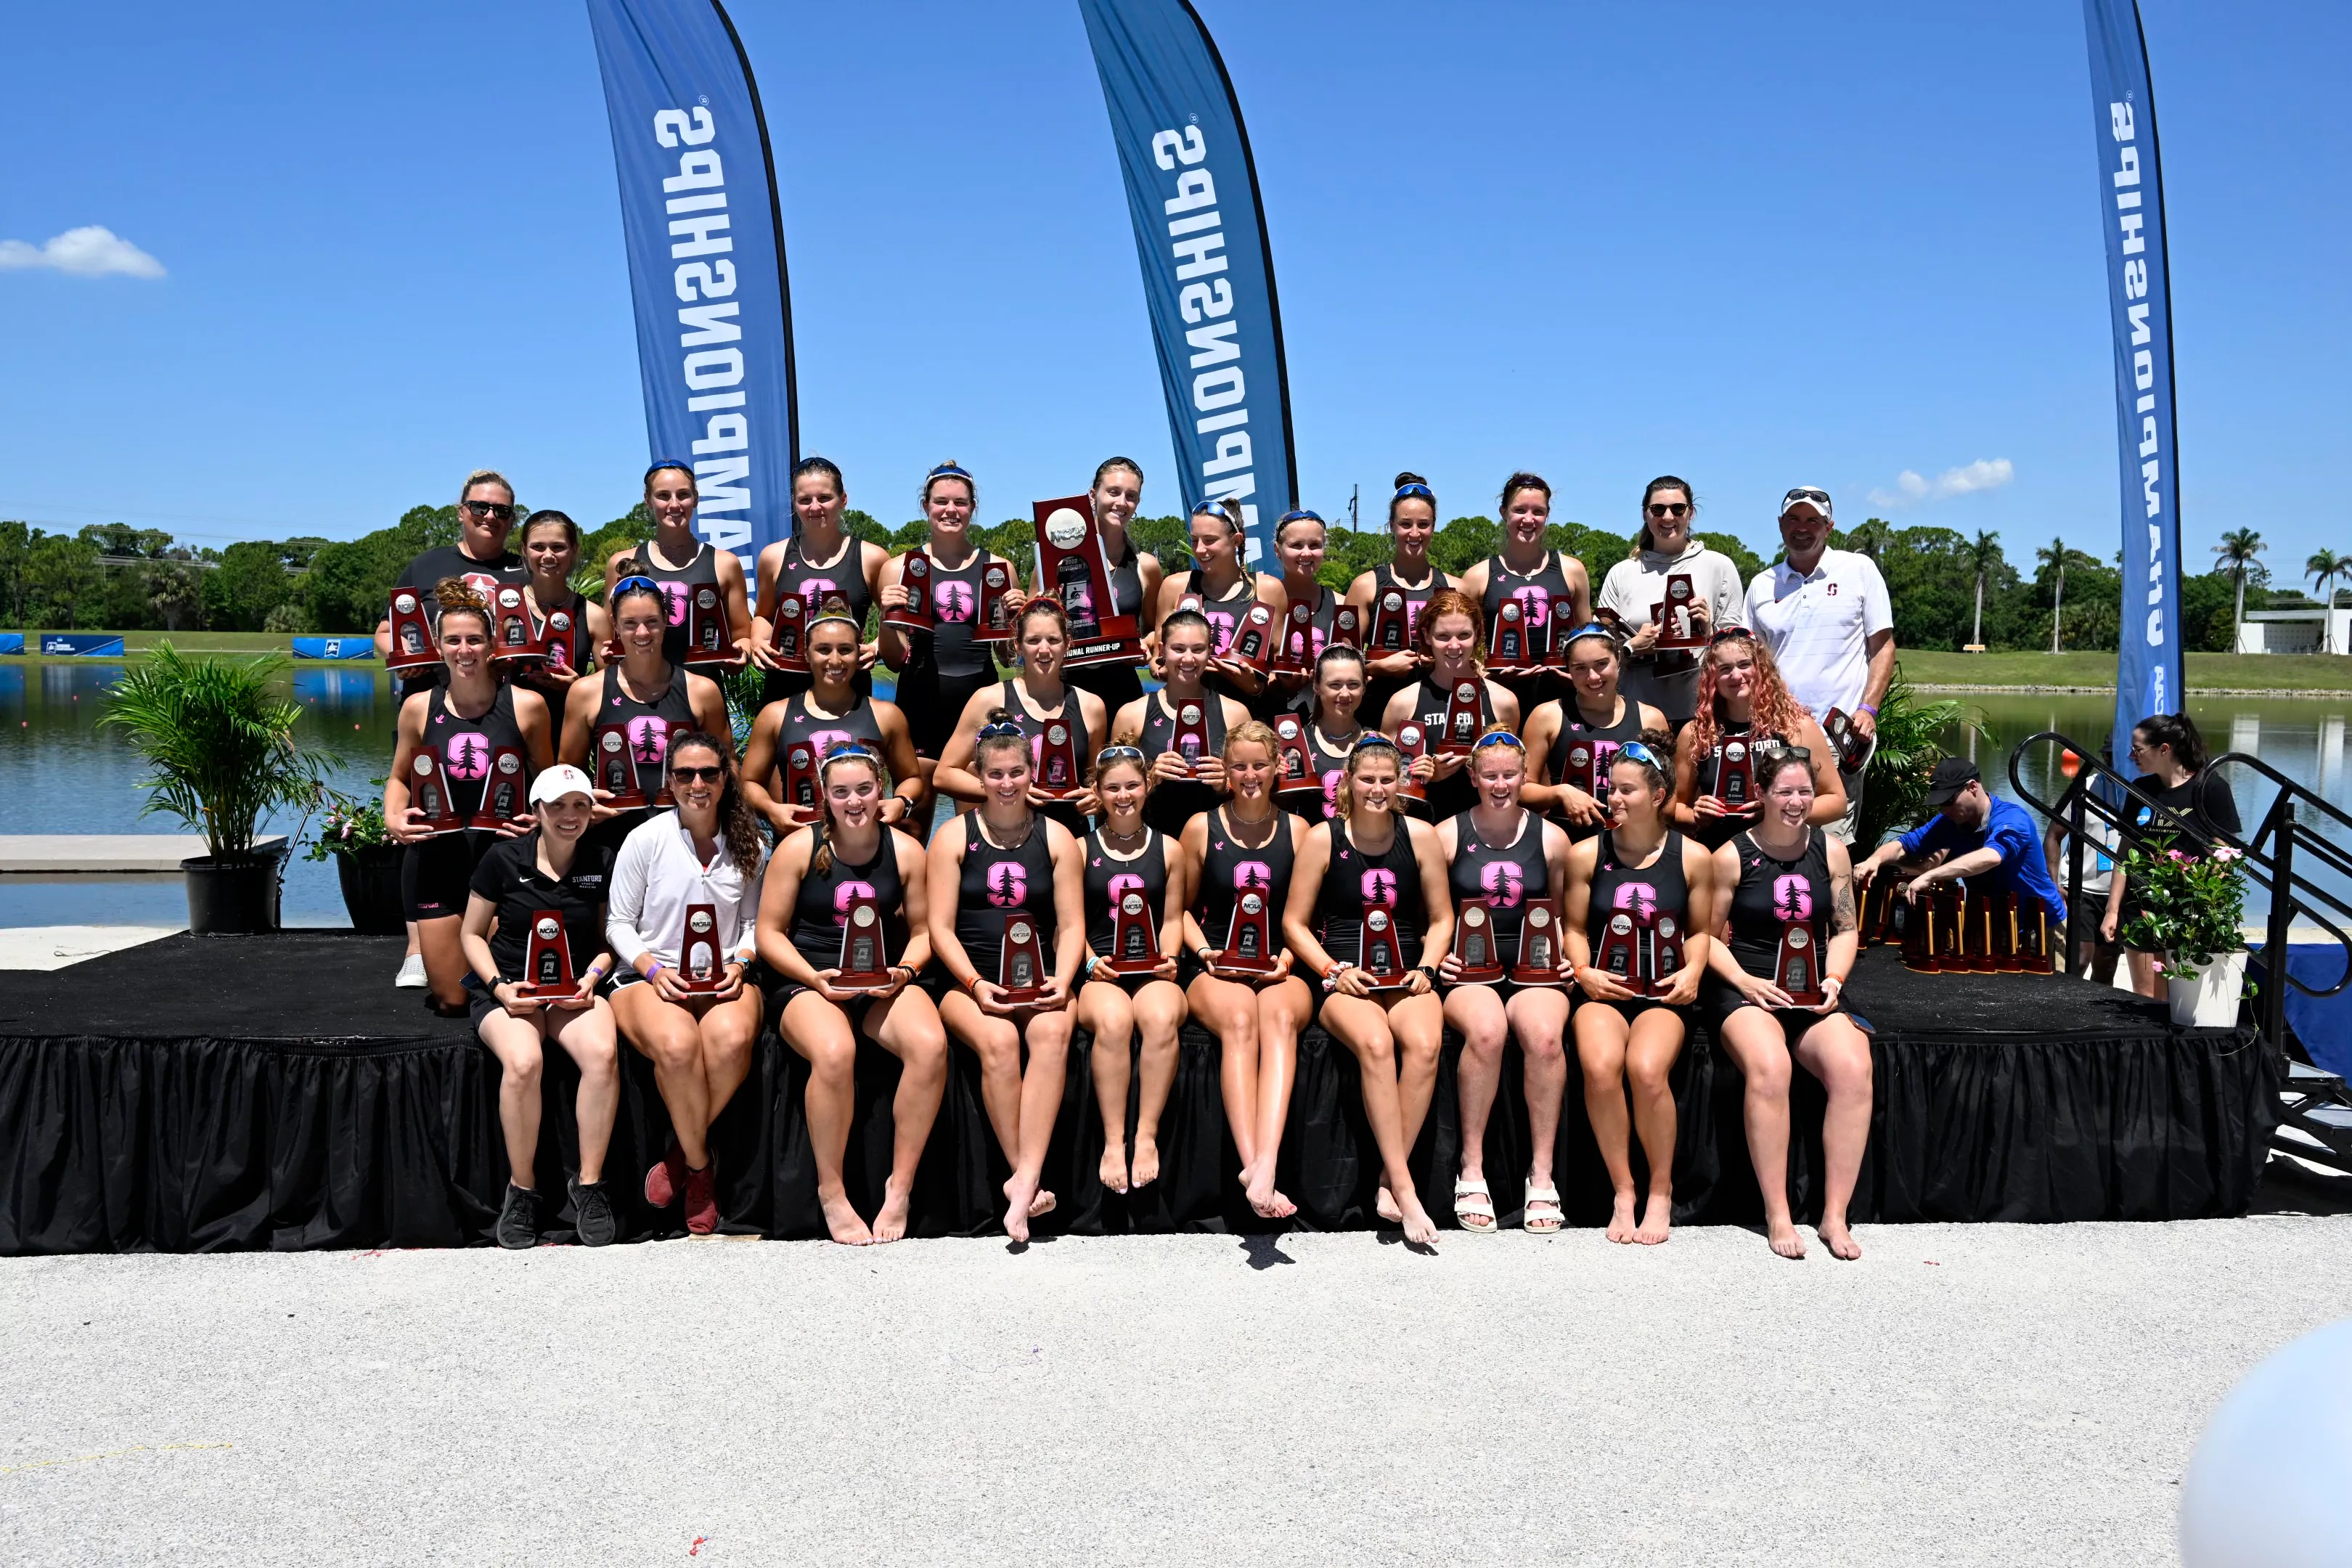 Women’s rowing finishes second at NCAA Championship